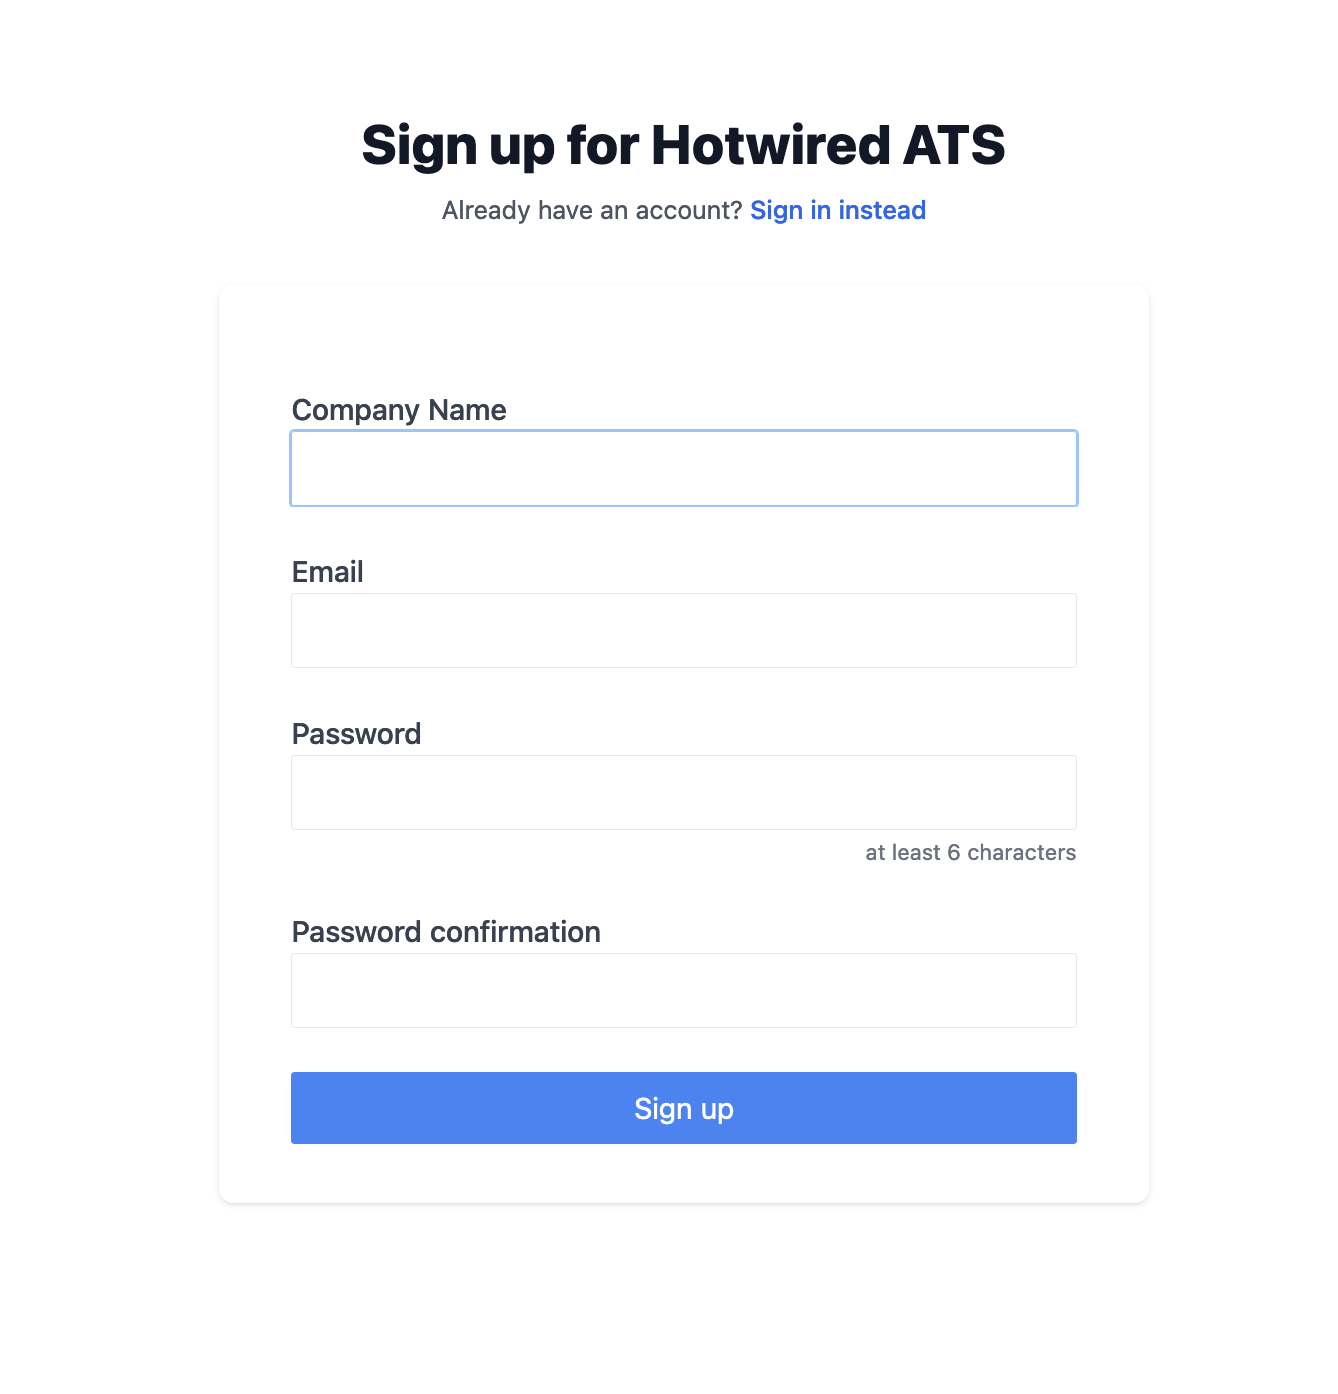 A screenshot of the Hotwired ATS signup page with CSS styles applied.